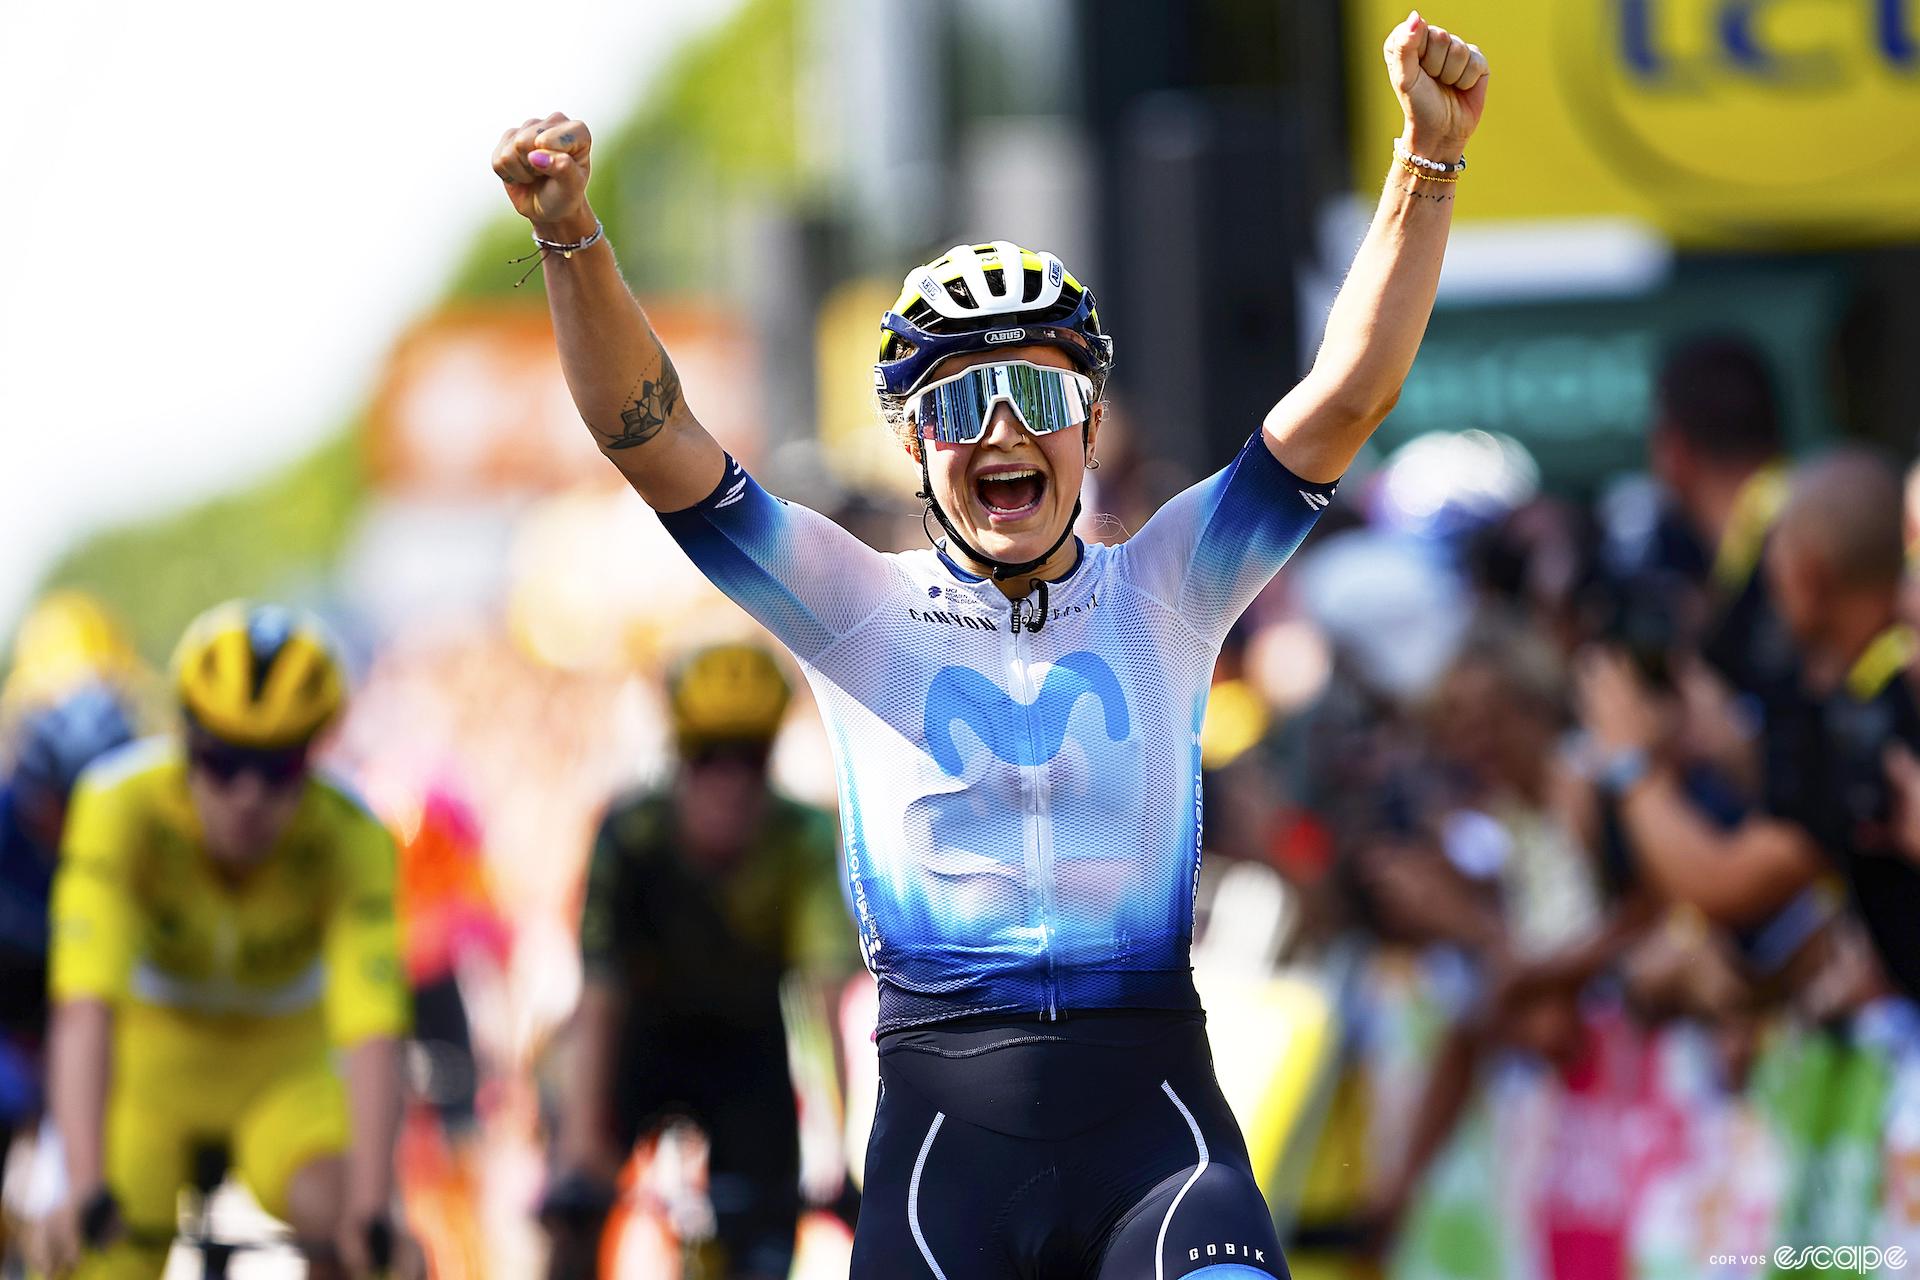 A woman raises her arms in victory as she wins a bike race.